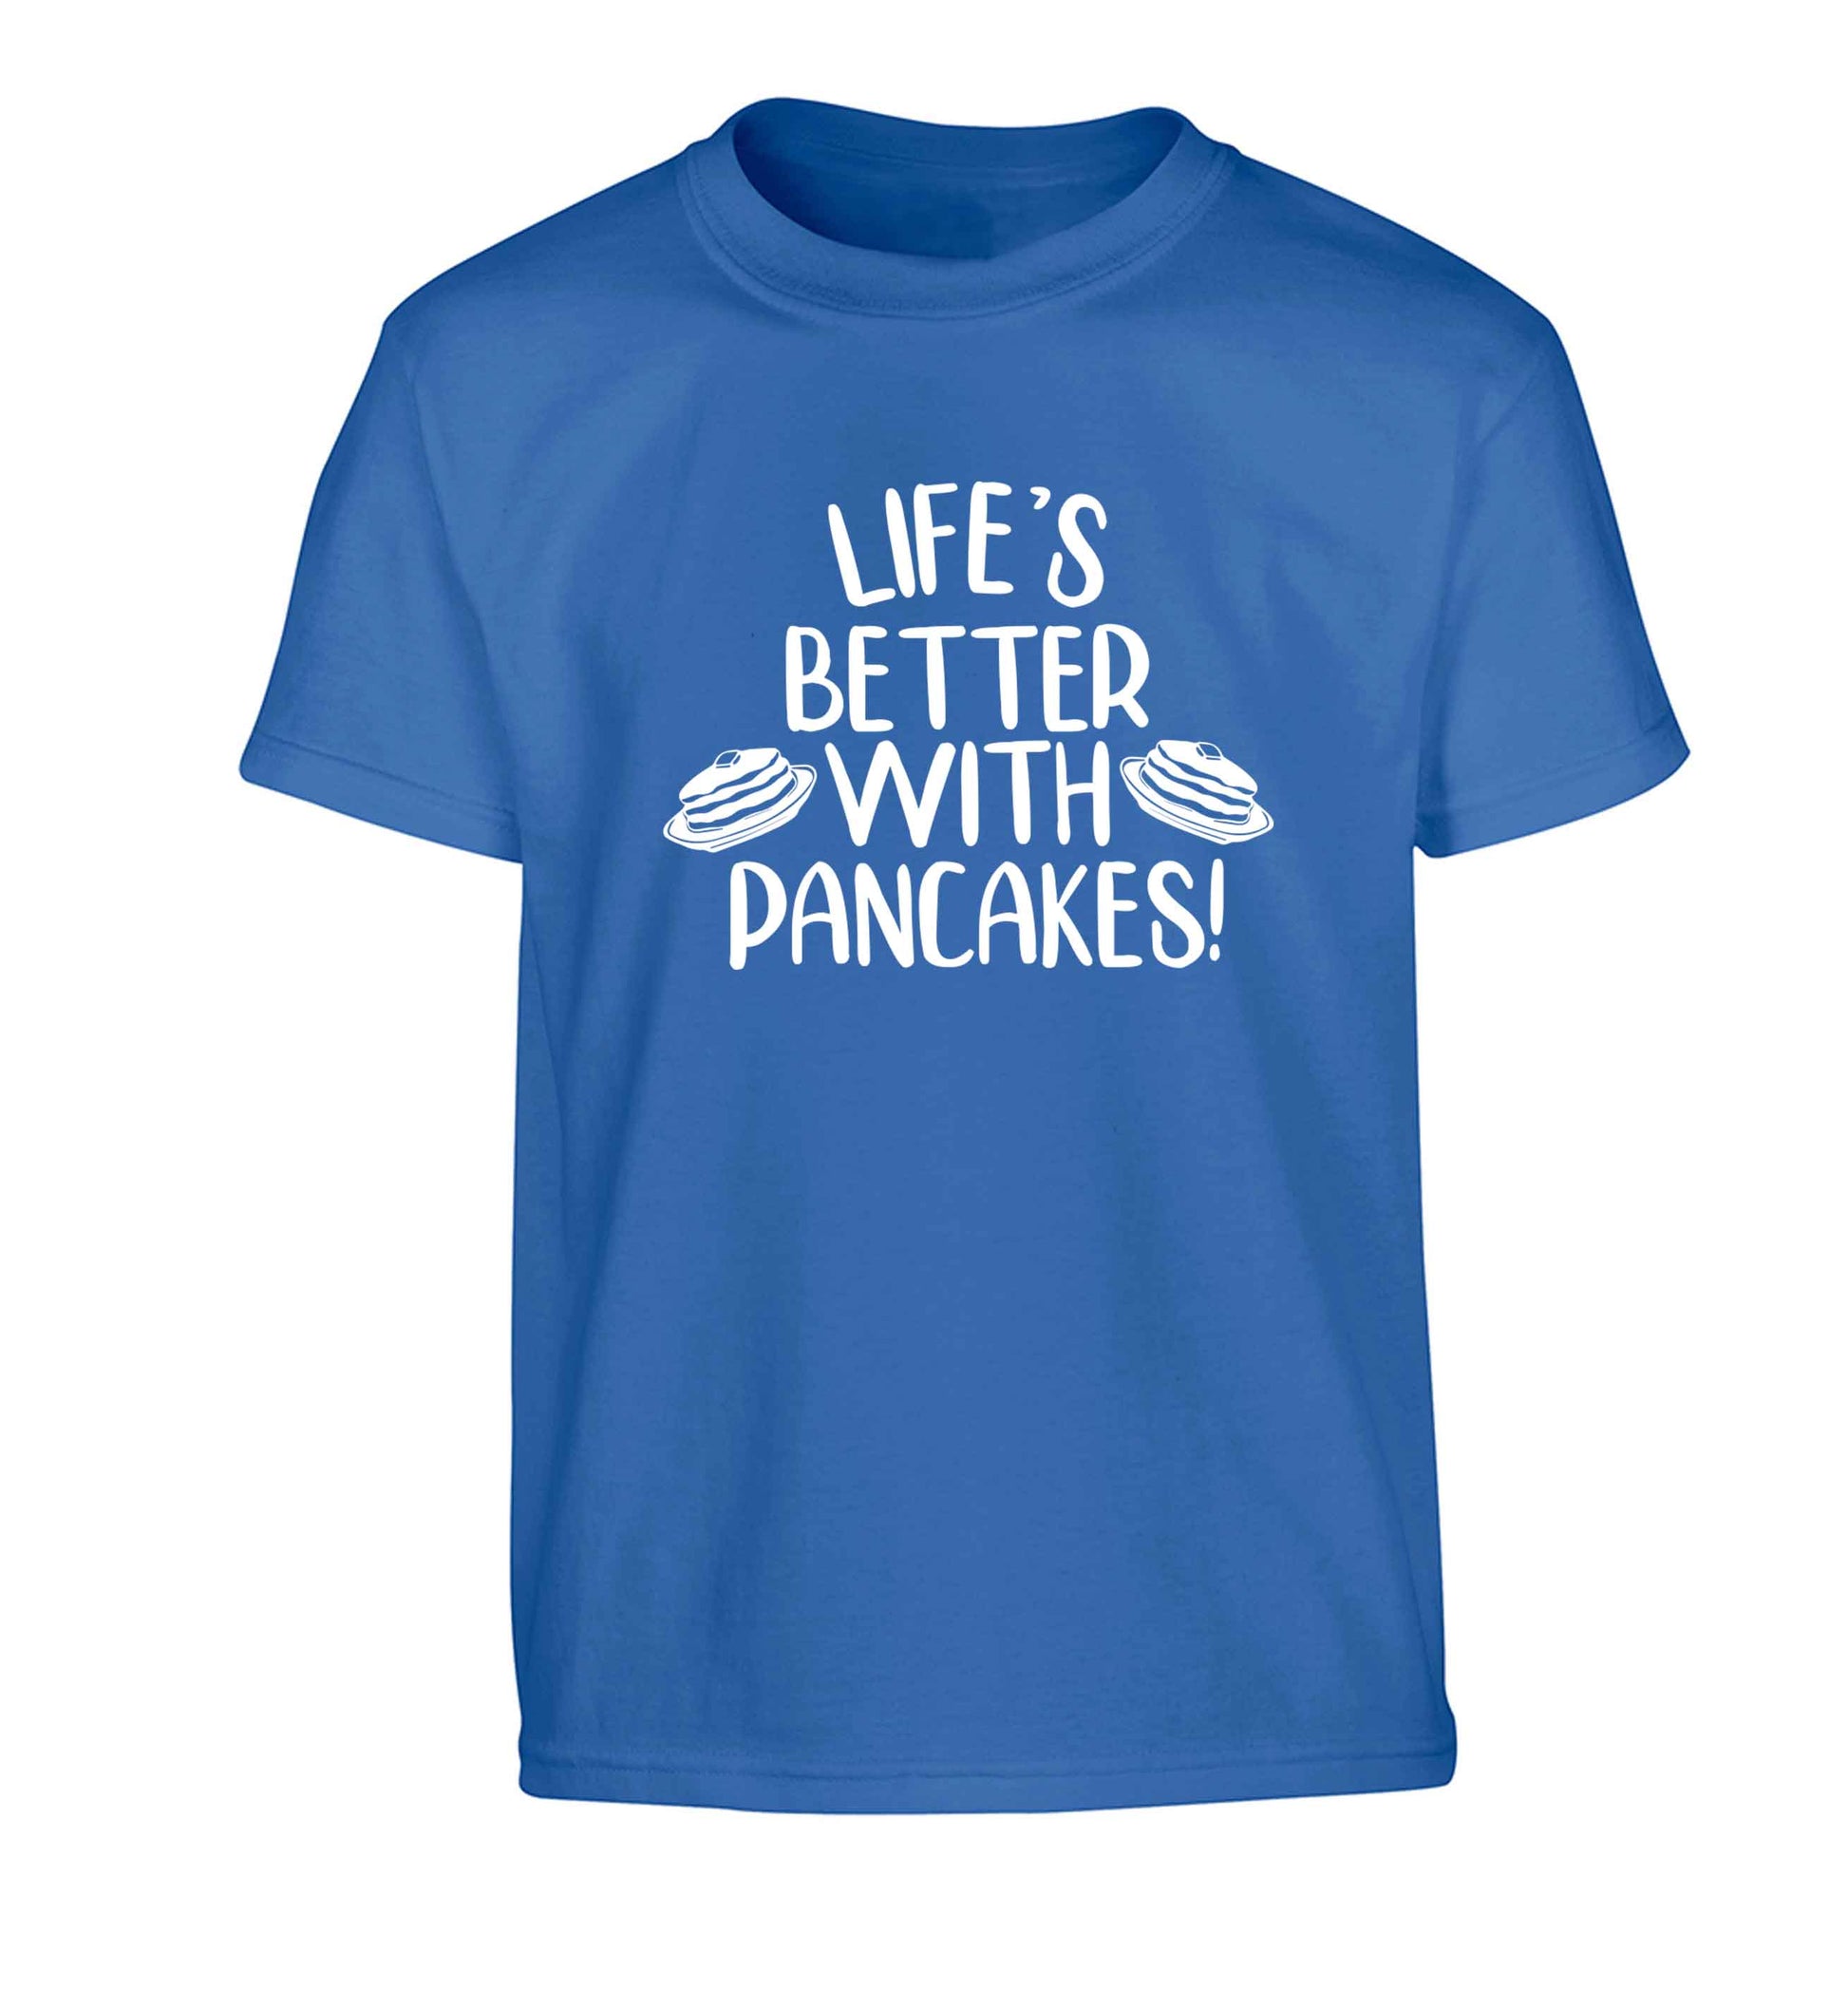 Life's better with pancakes Children's blue Tshirt 12-13 Years